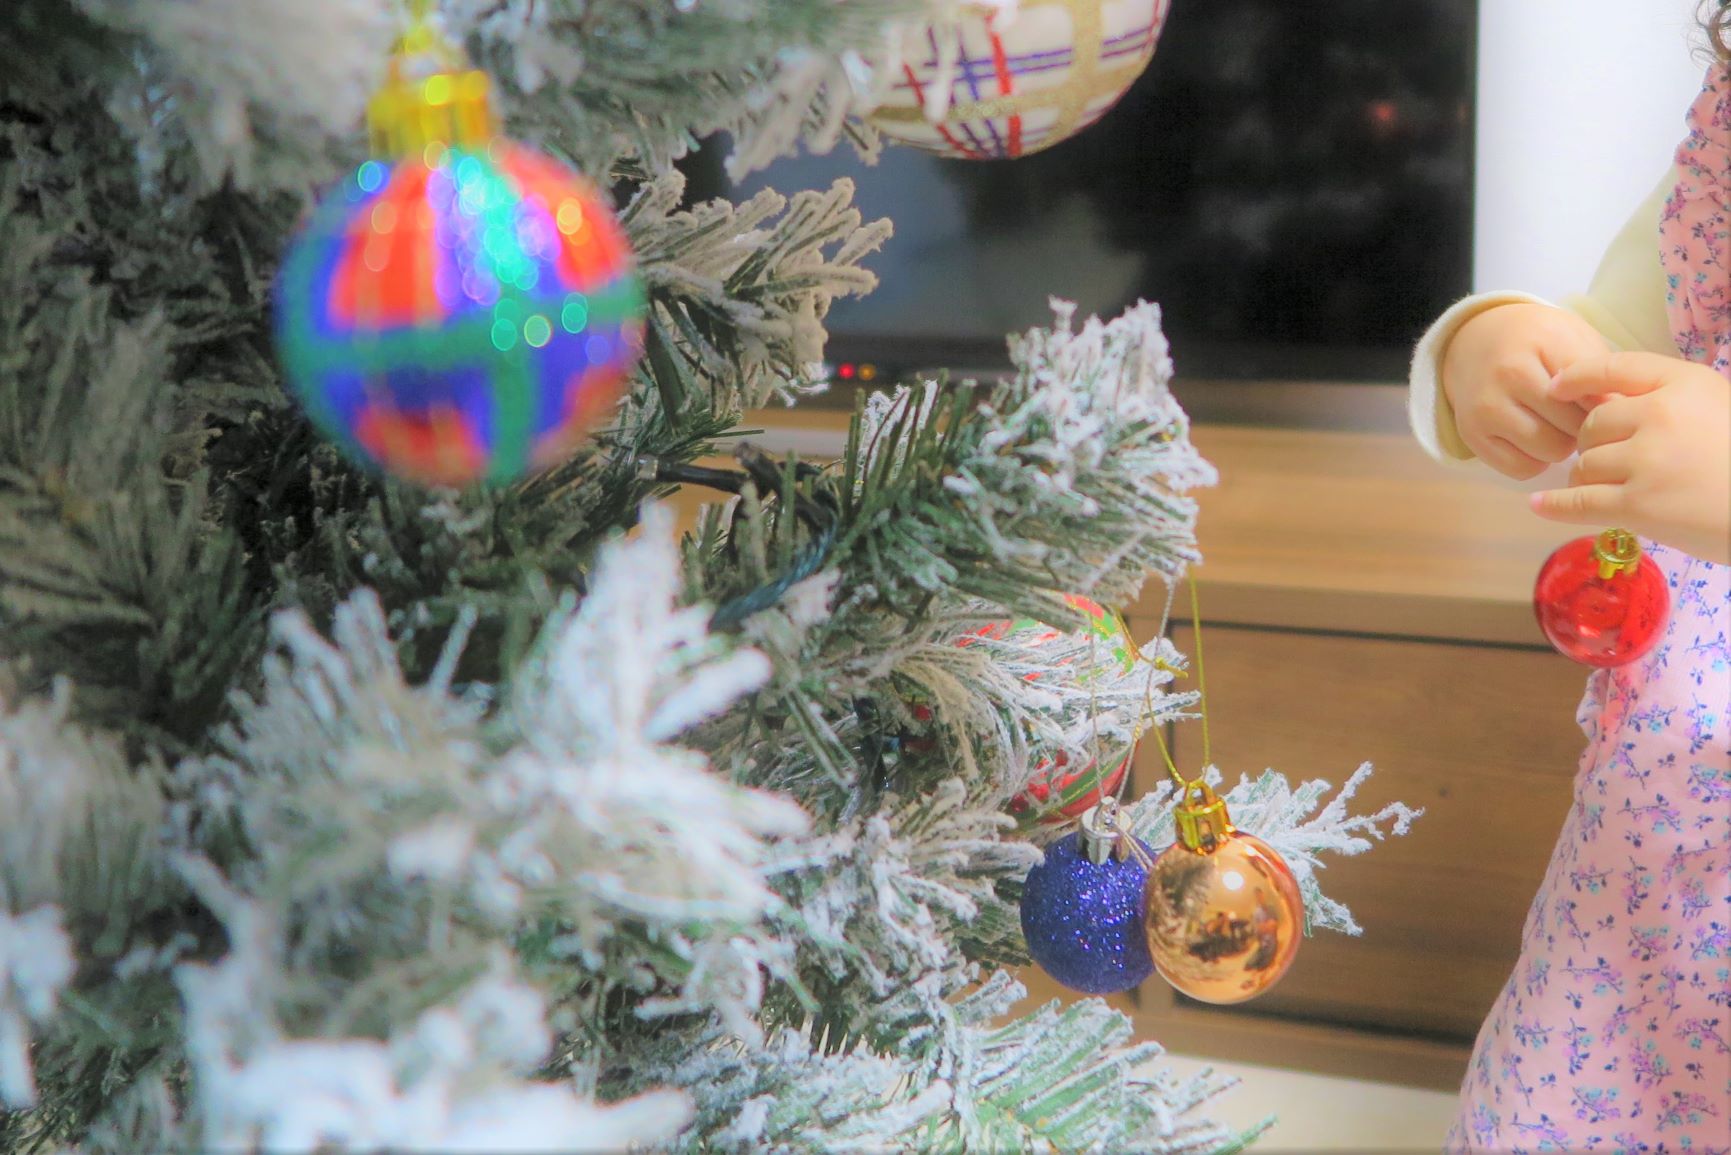 Decorate the Christmas tree with ornaments